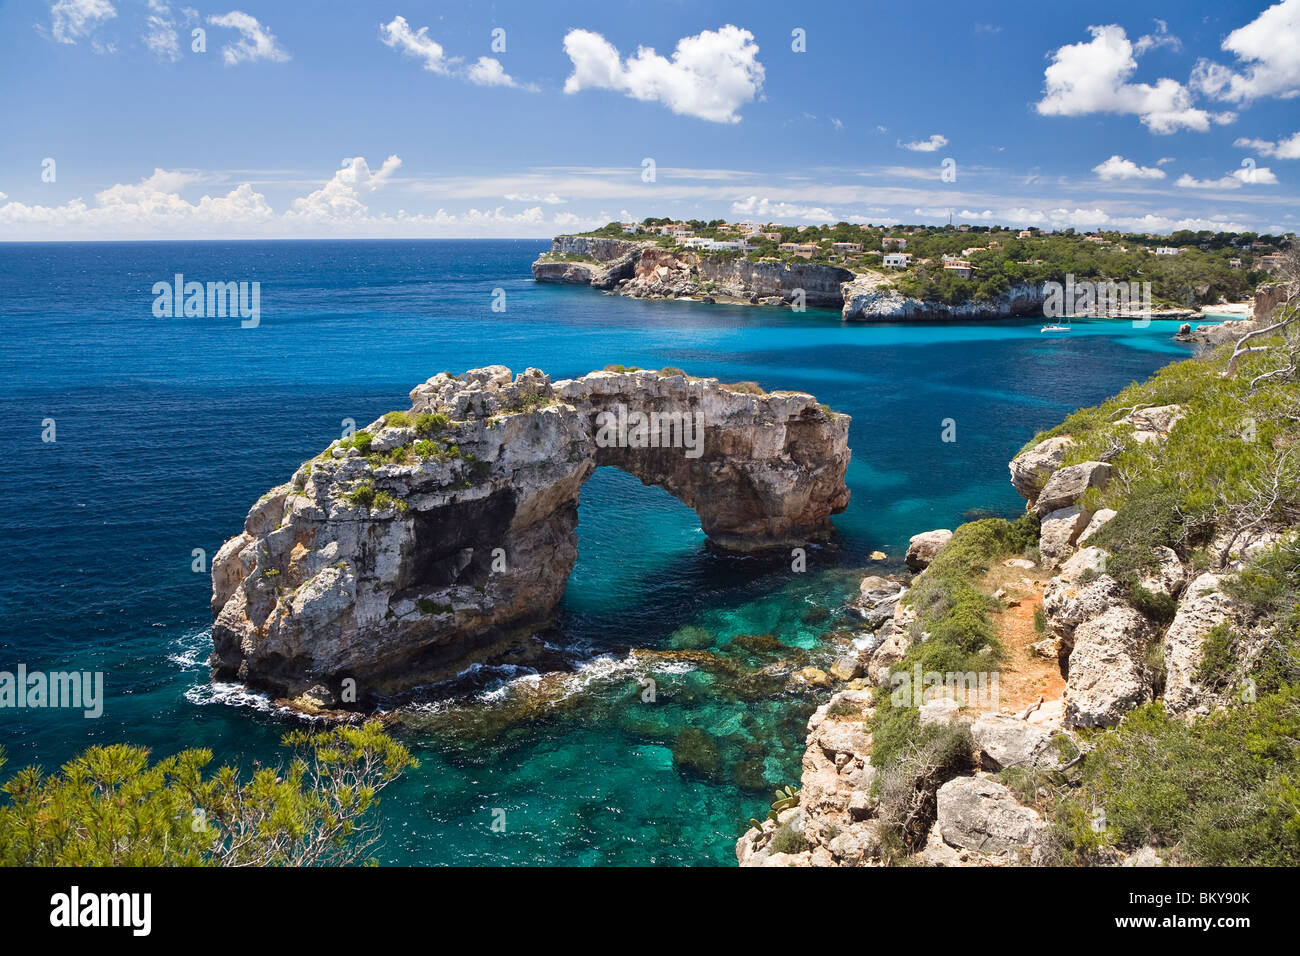 Archway of Es Pontas in the sunlight, Cala Santanyi, Mallorca, Balearic Islands, Spain, Europe Stock Photo